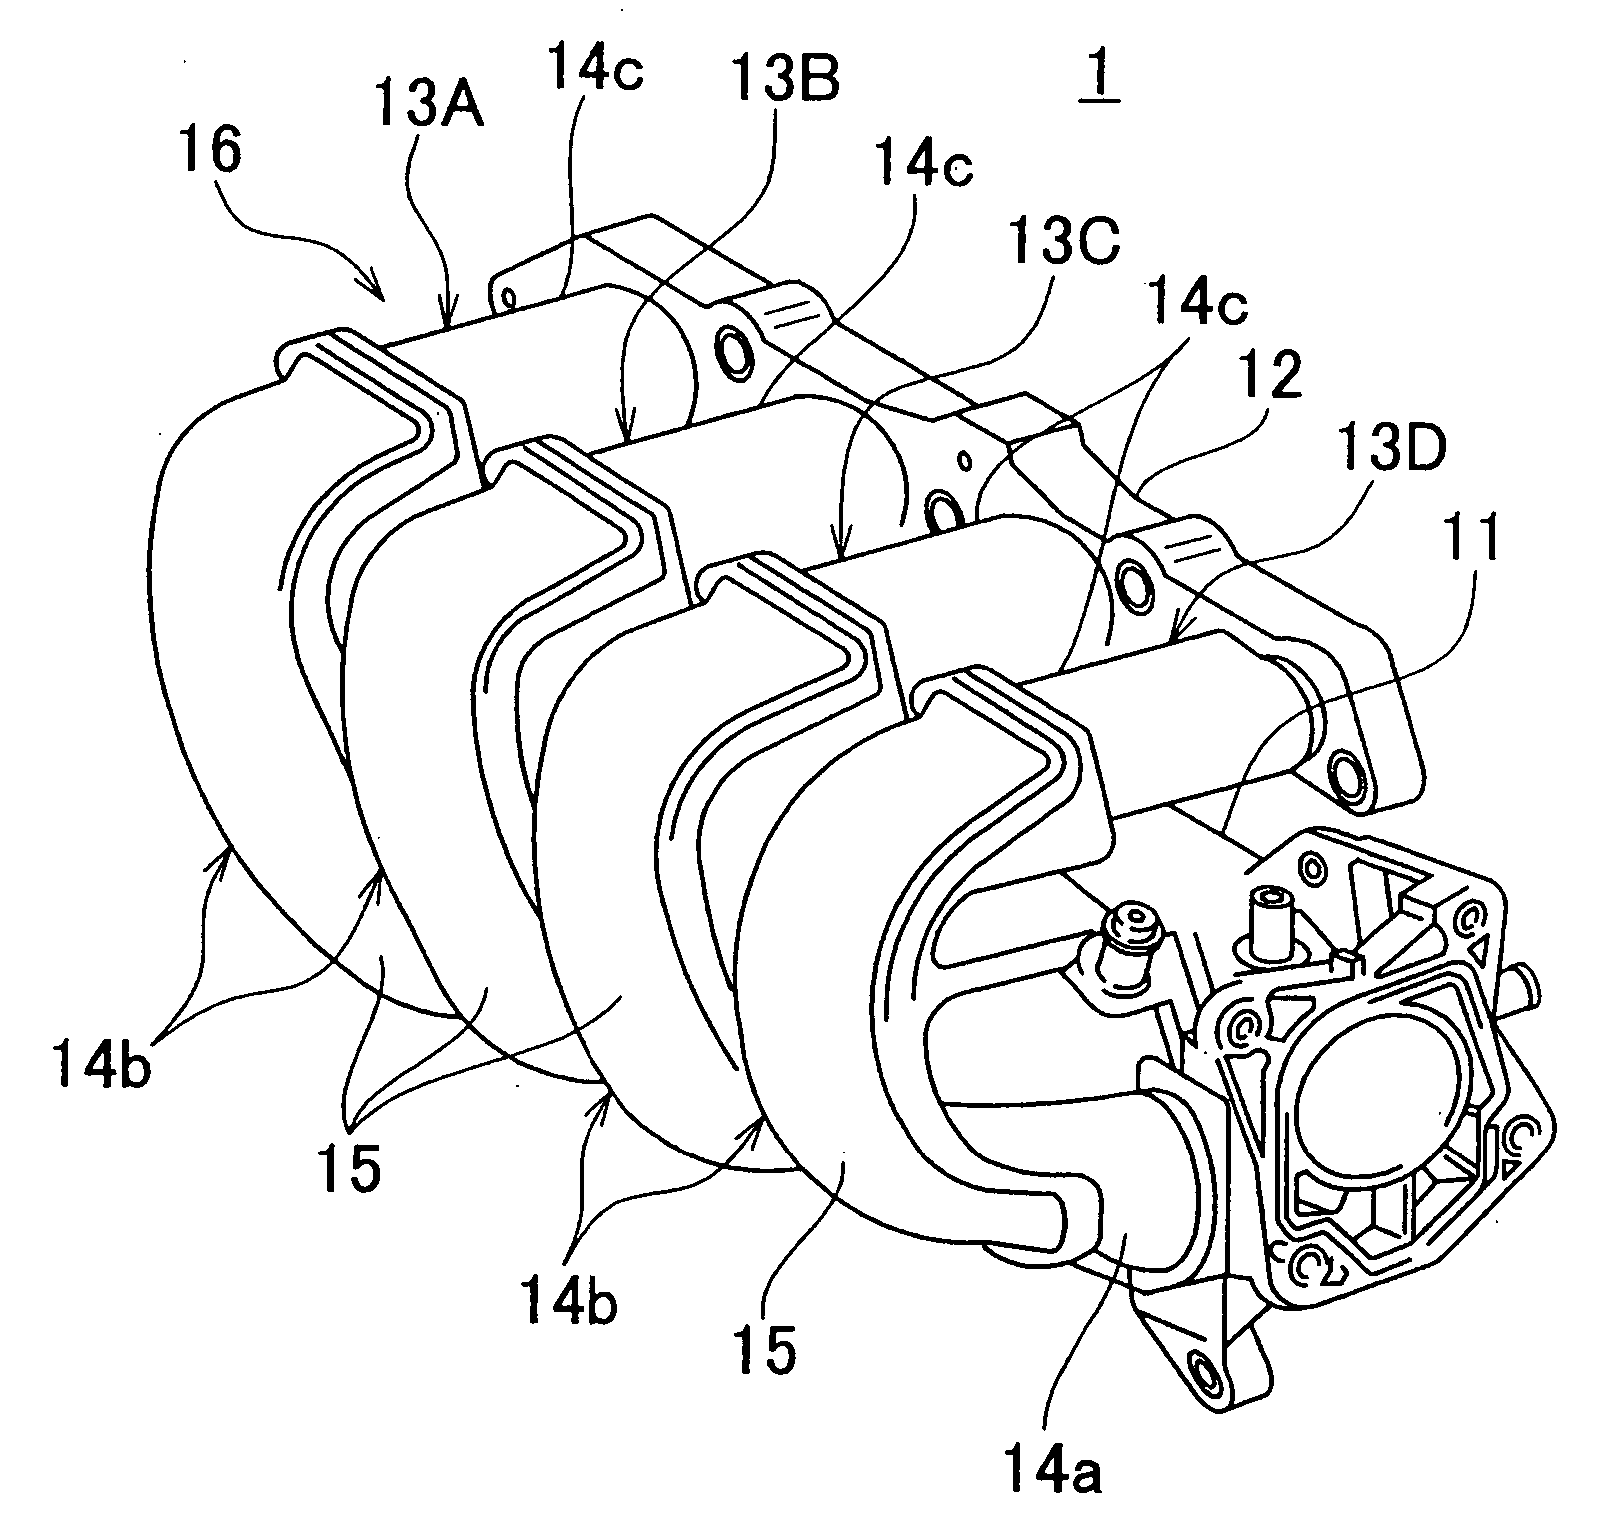 Welding structure for synthetic resin intake manifold